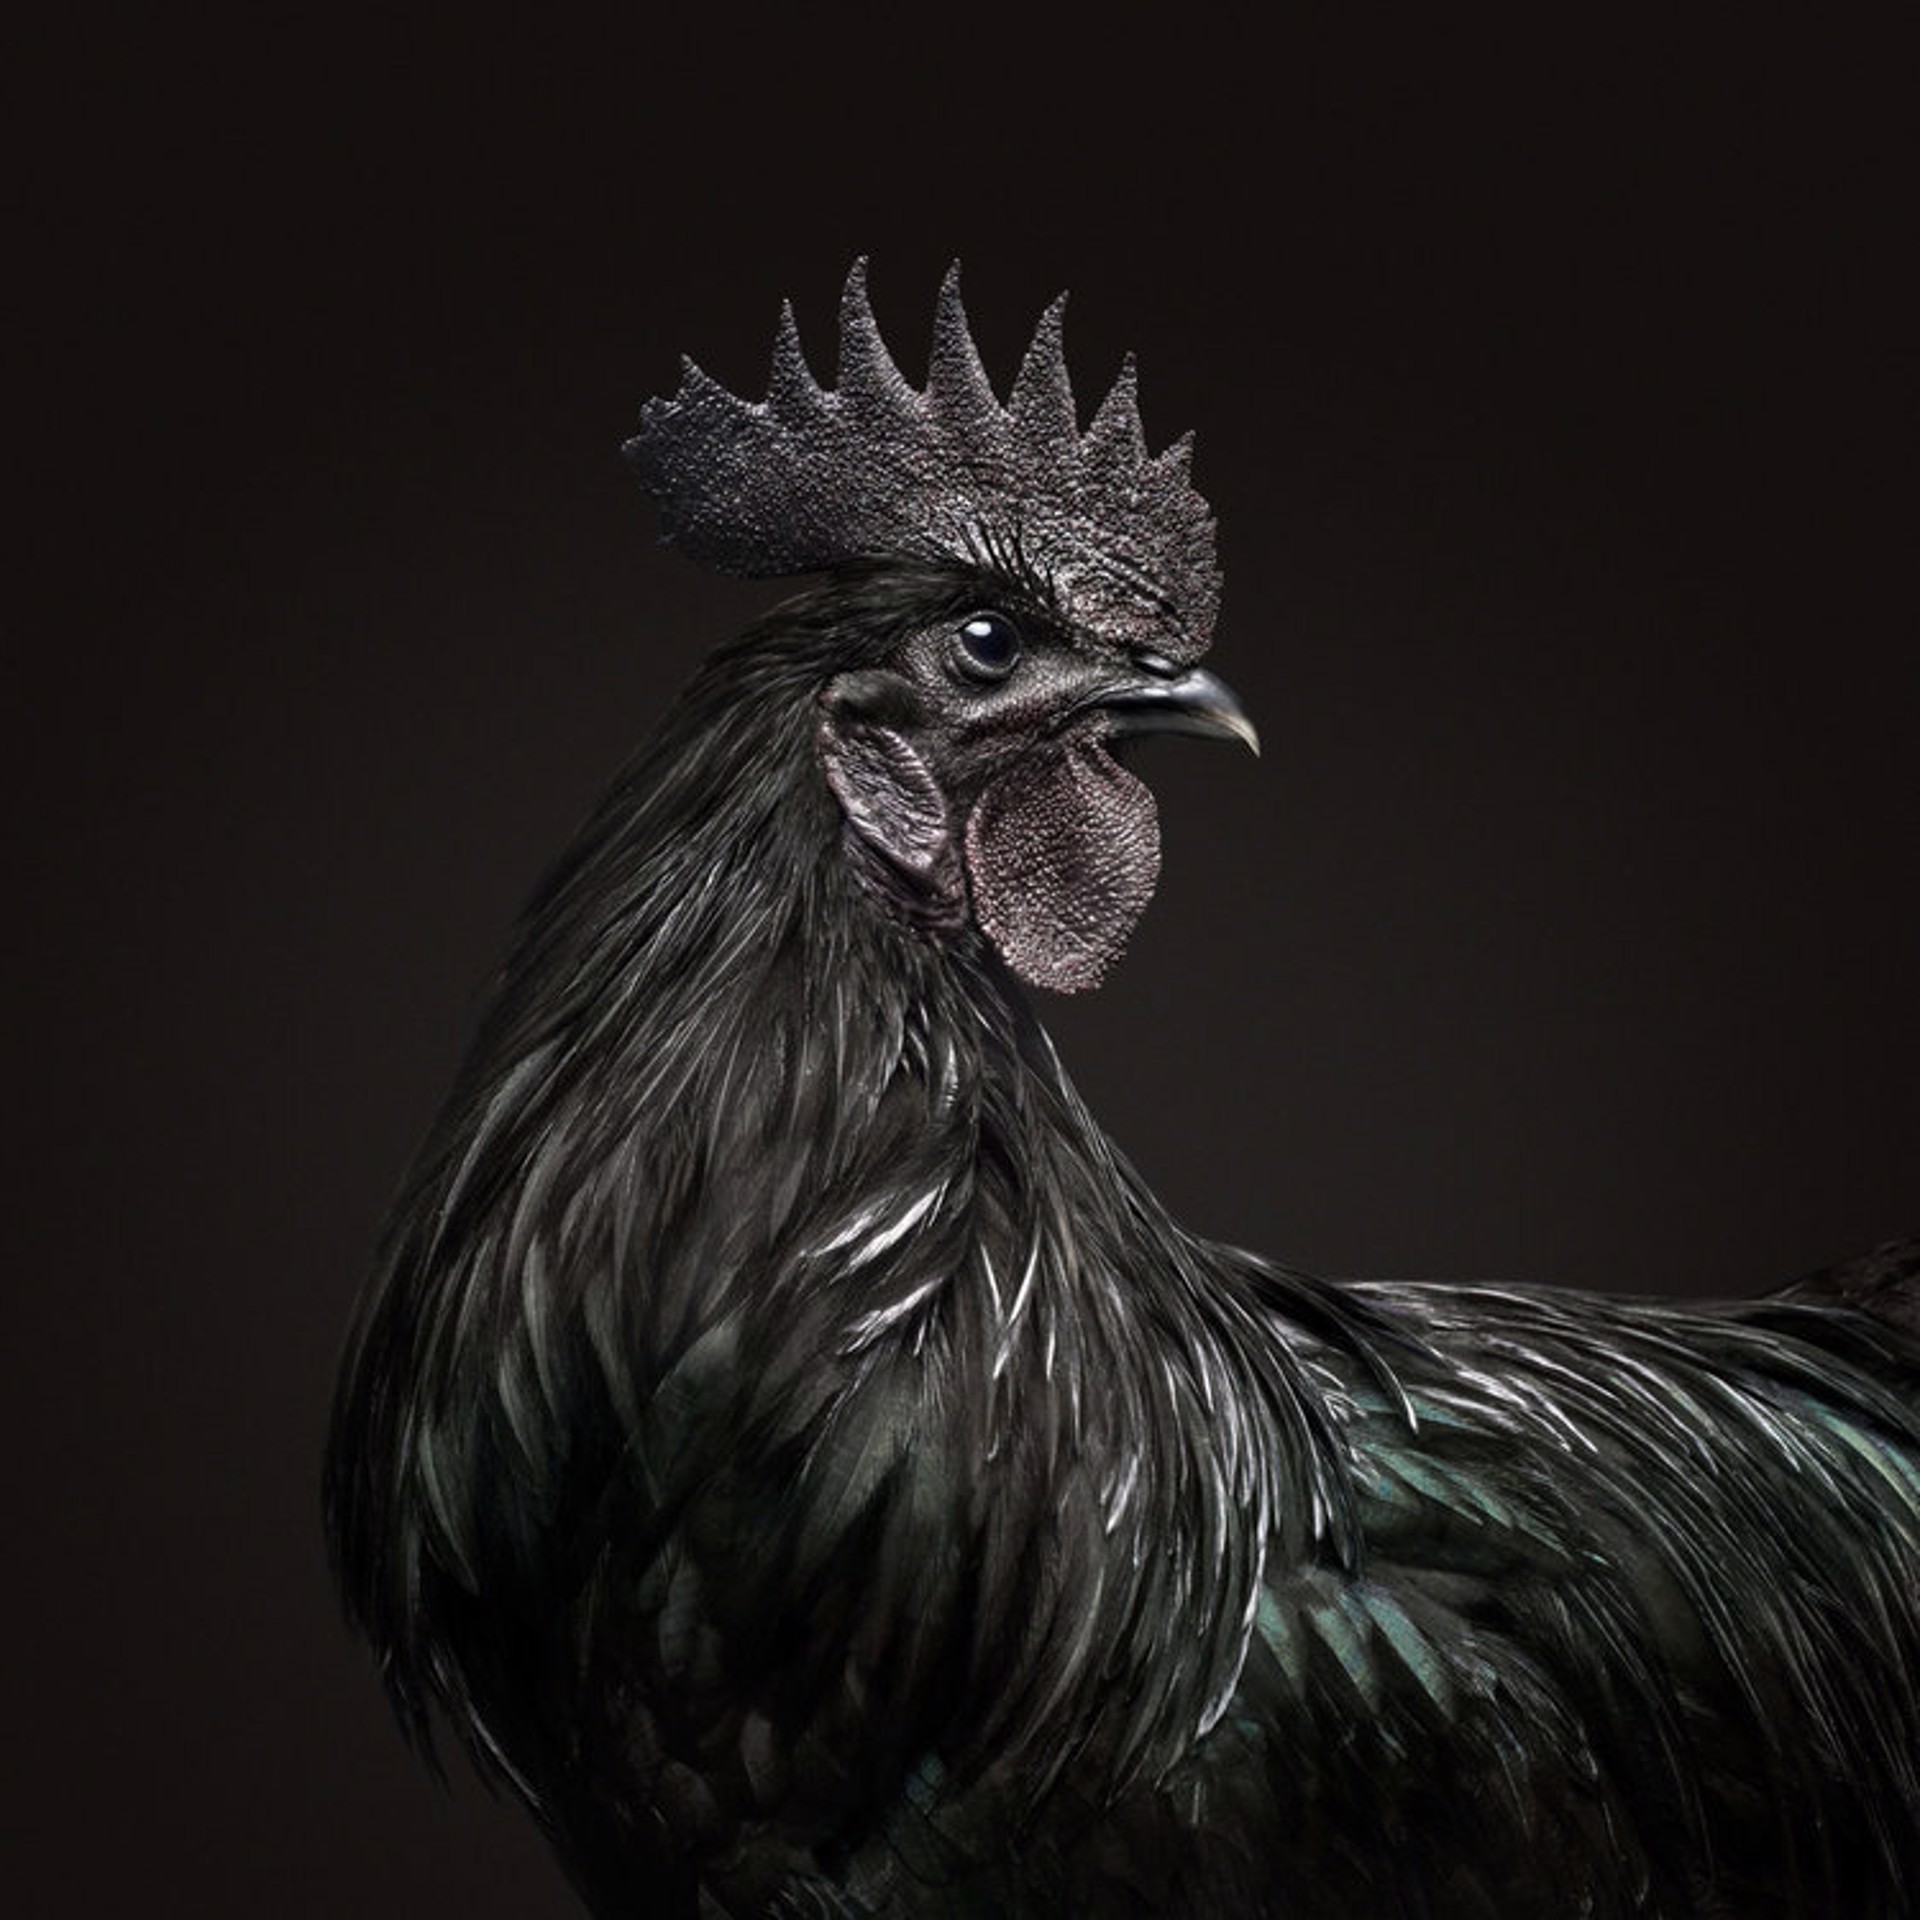 Black Rooster by Randal Ford